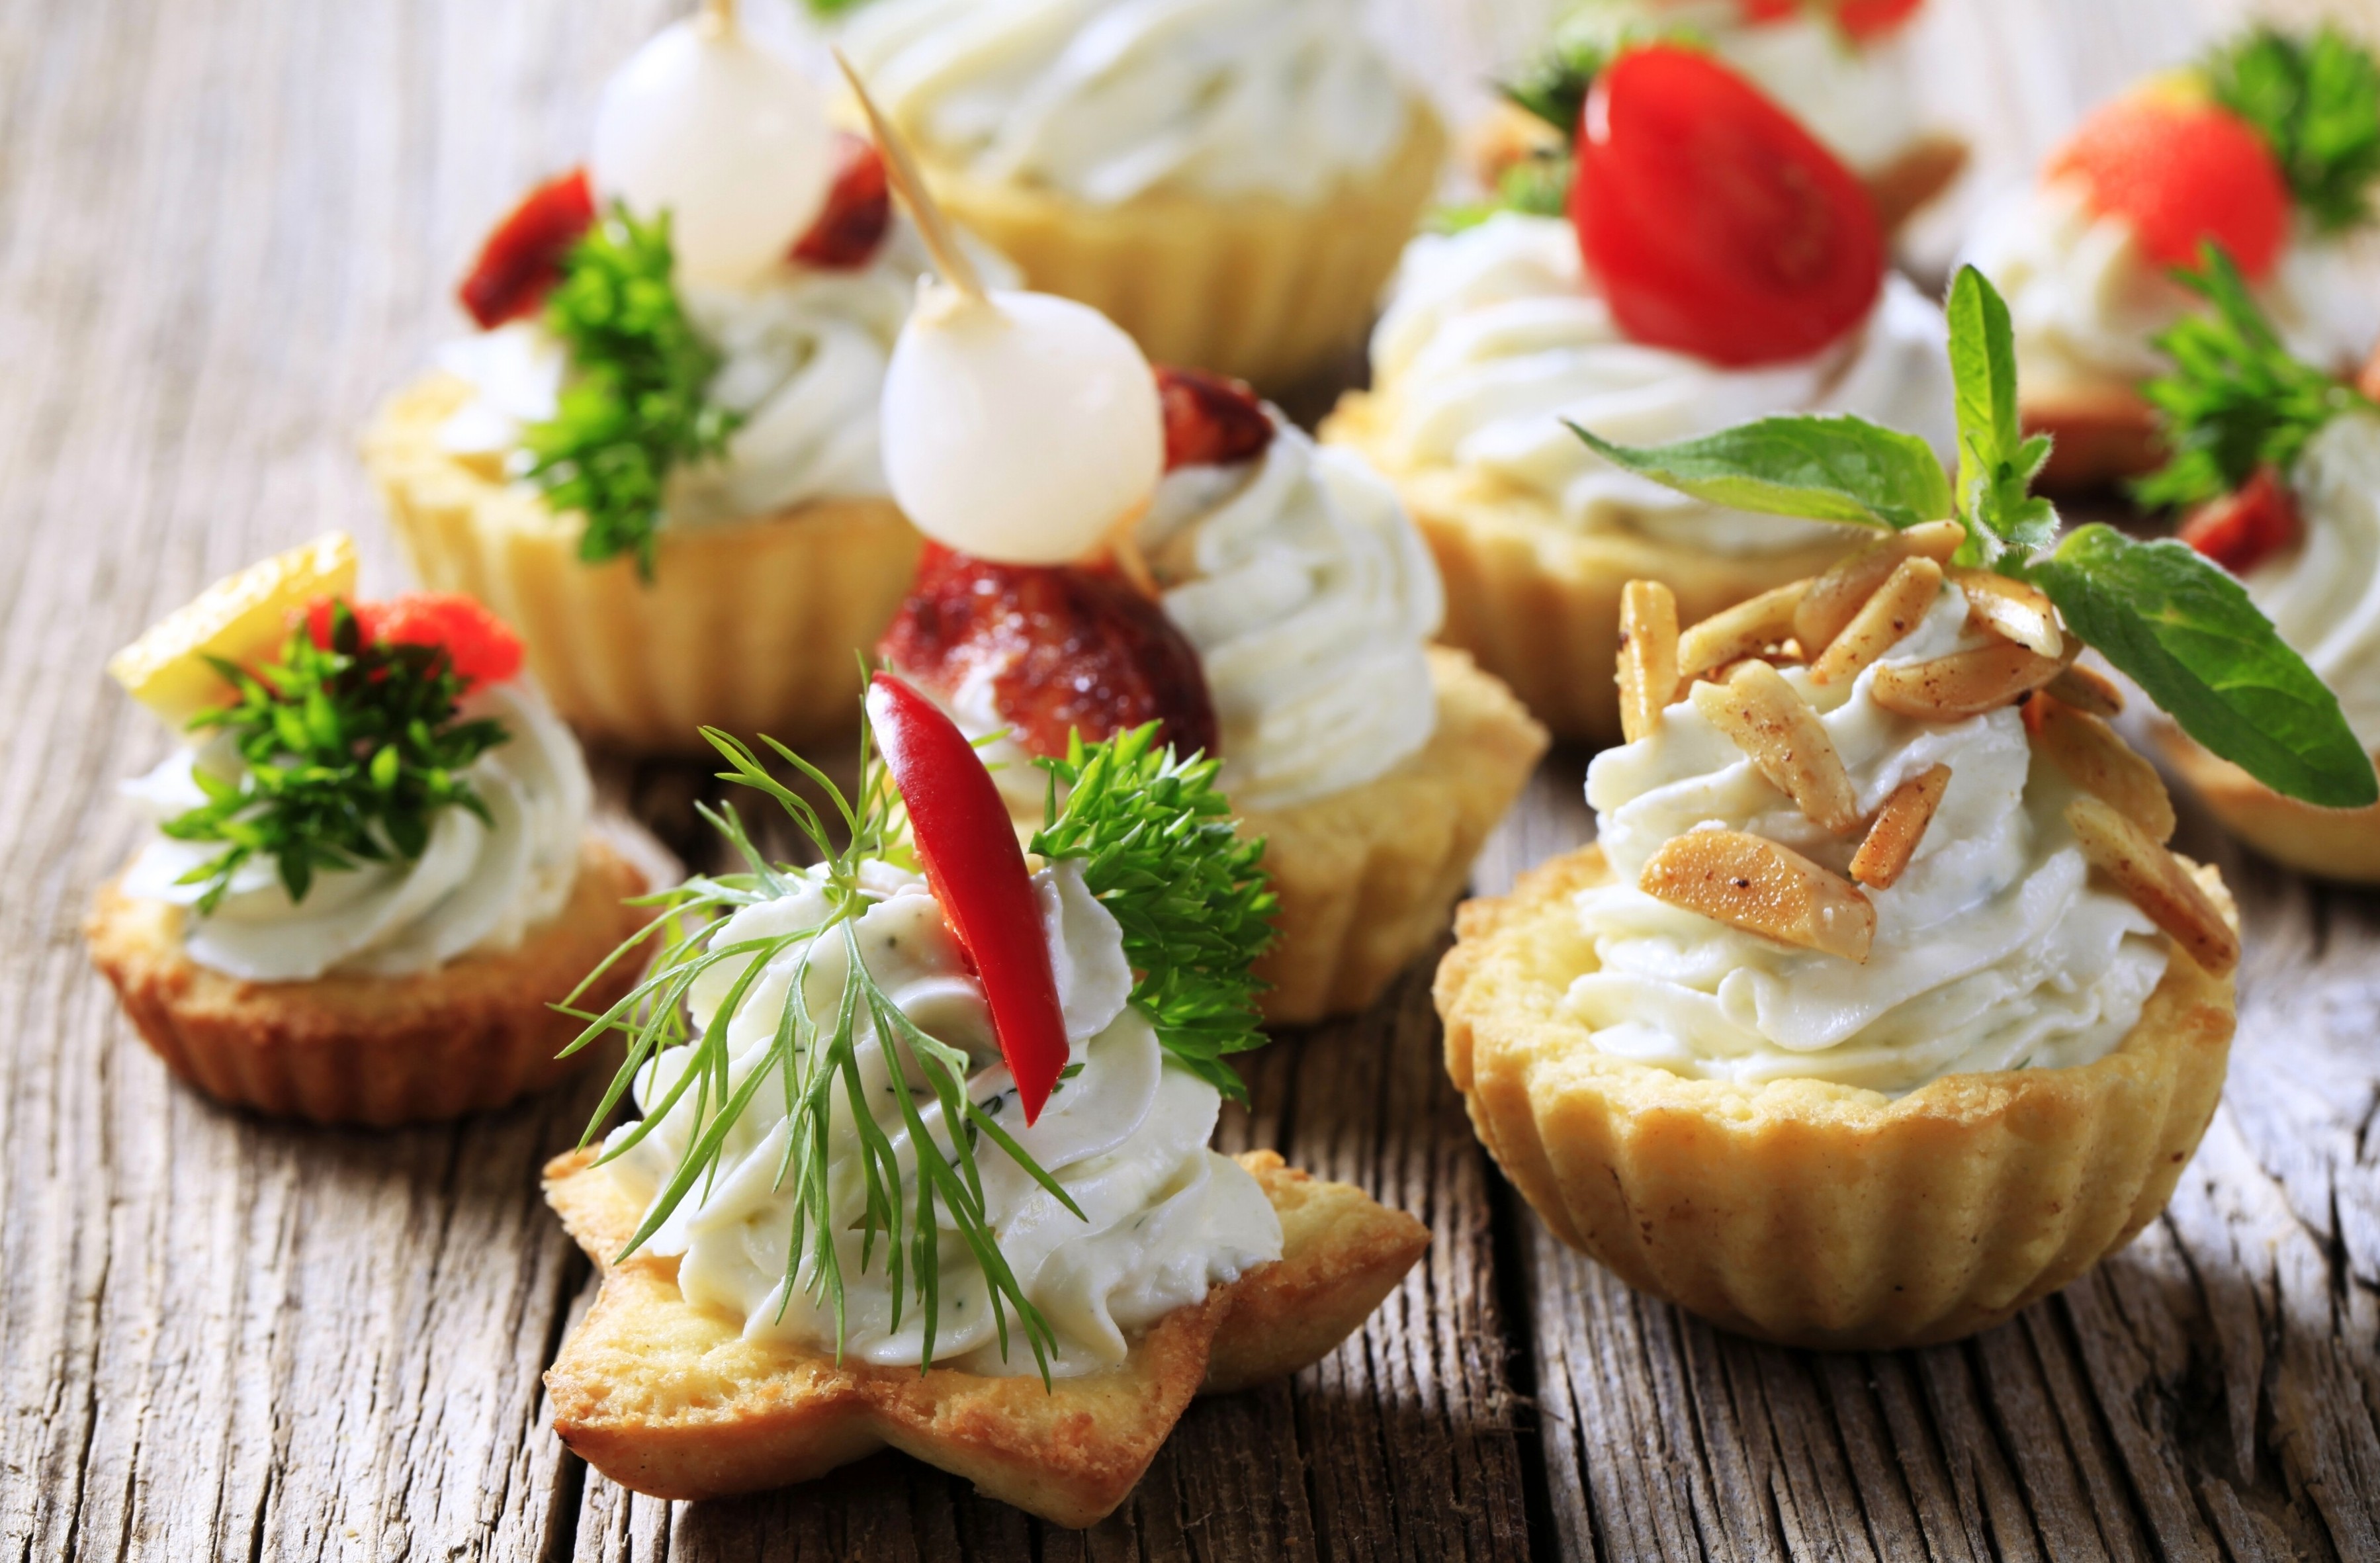 Ideas of small tartlets, mini canap on skewers with cheese